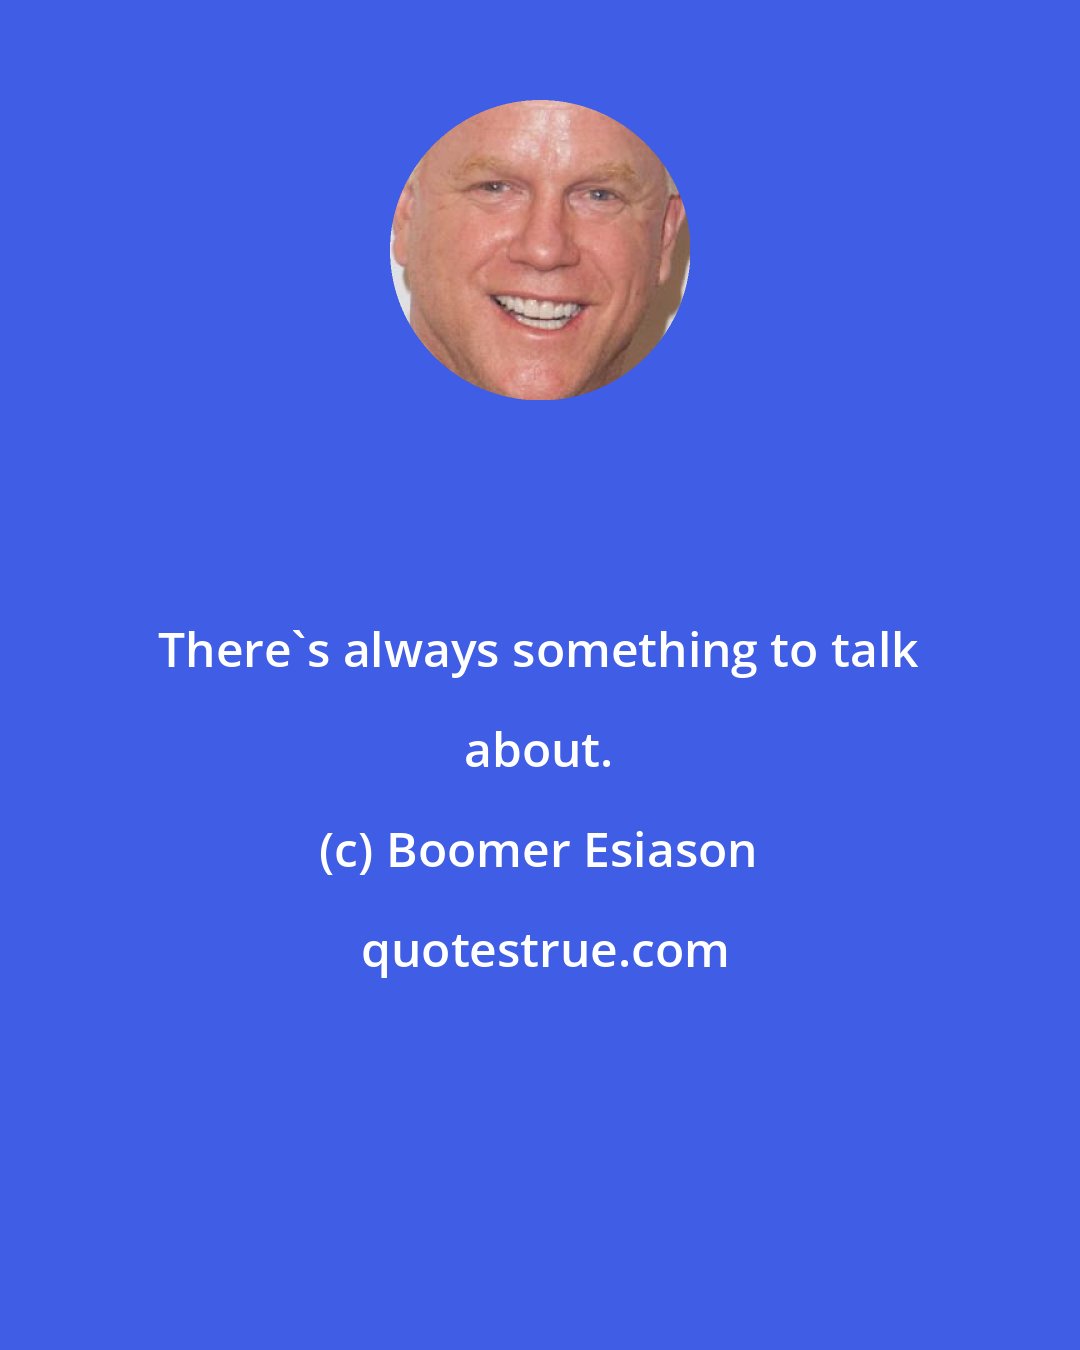 Boomer Esiason: There's always something to talk about.